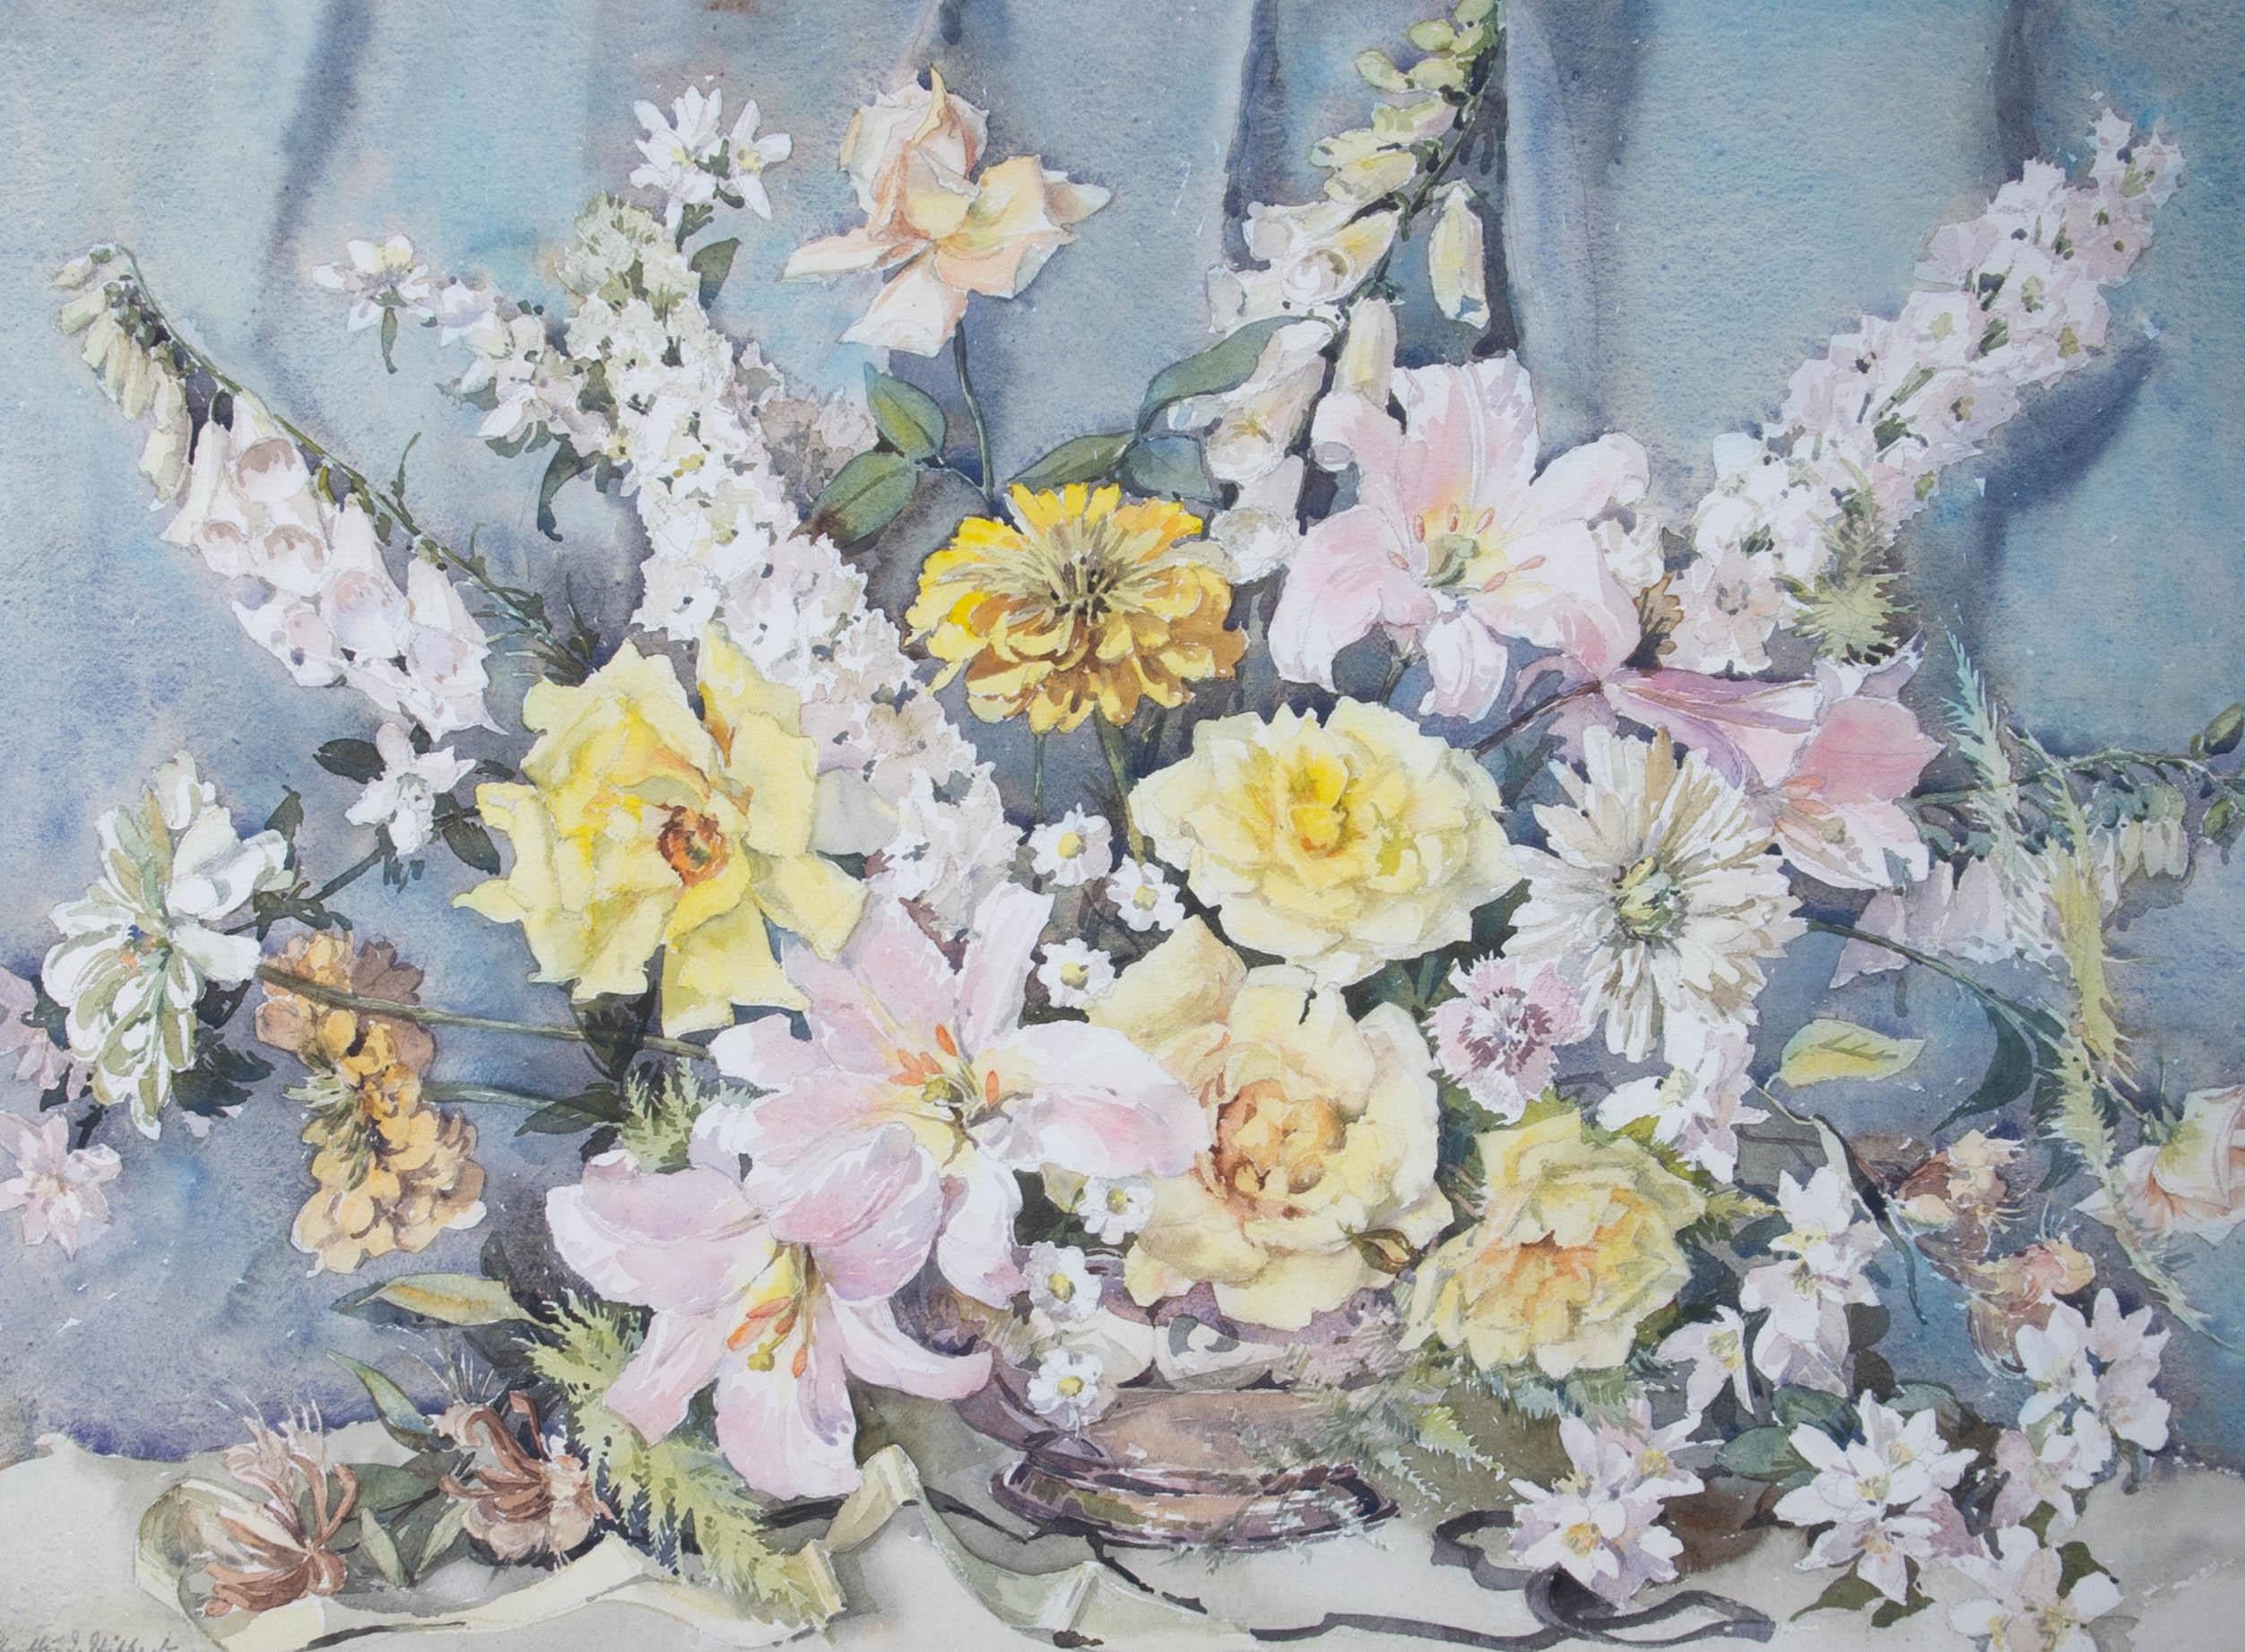 This large study of a display of flowers incorporates lilies, roses, foxgloves, hyacinths and honeysuckle among other pretty flowers. The artist's delicate touch has created a harmonious atmosphere in complementary colours. Signed to the lower left.